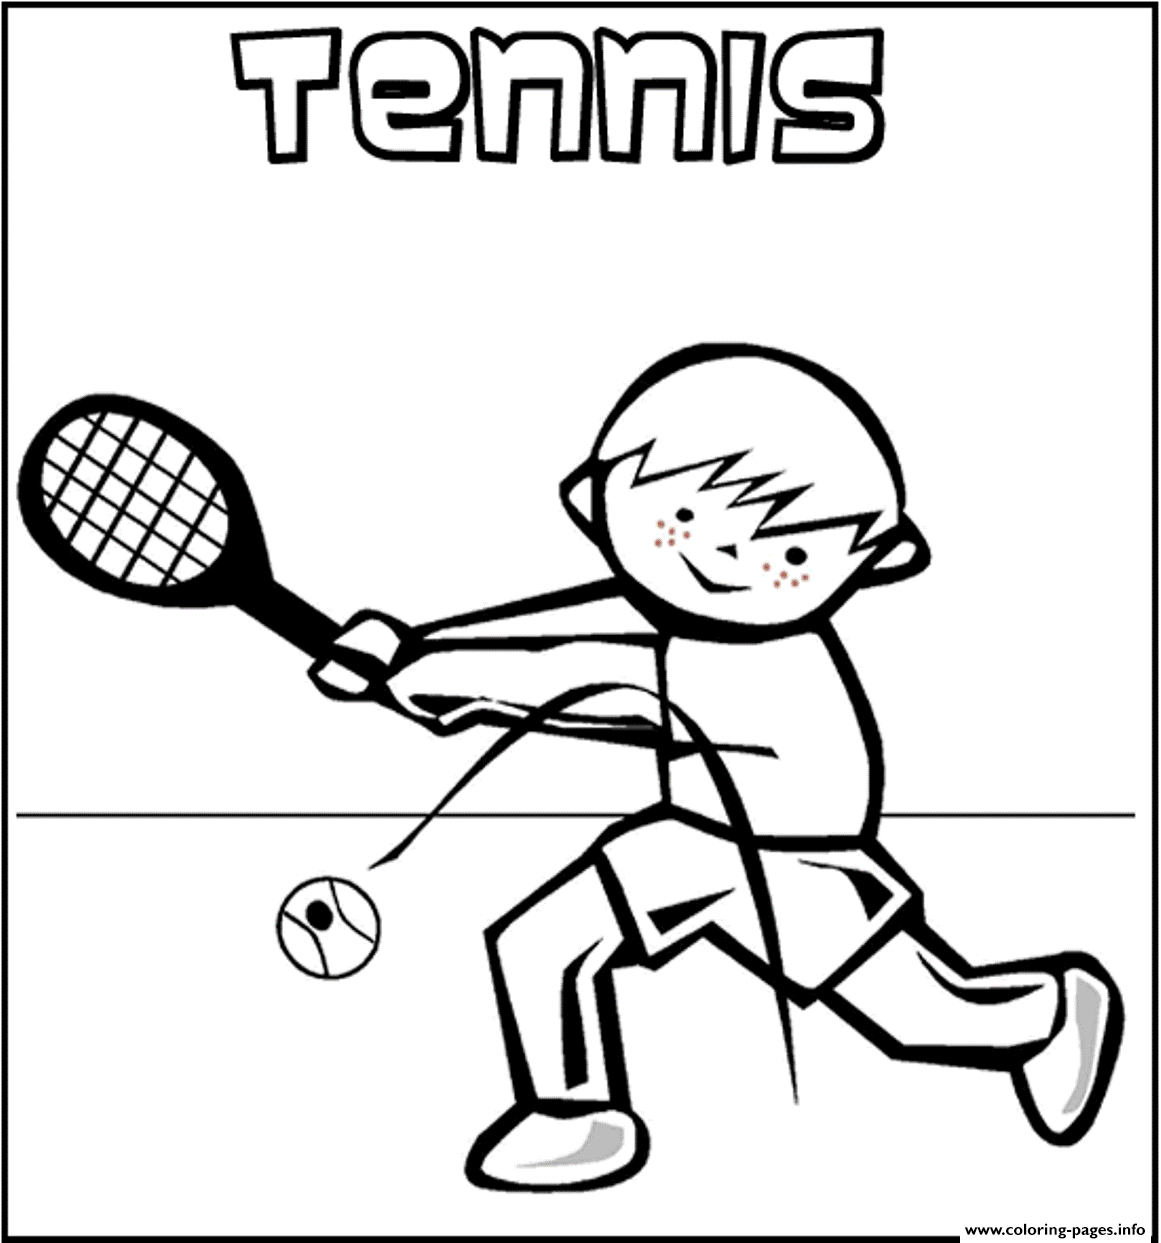 Playing Tennis S3682 coloring